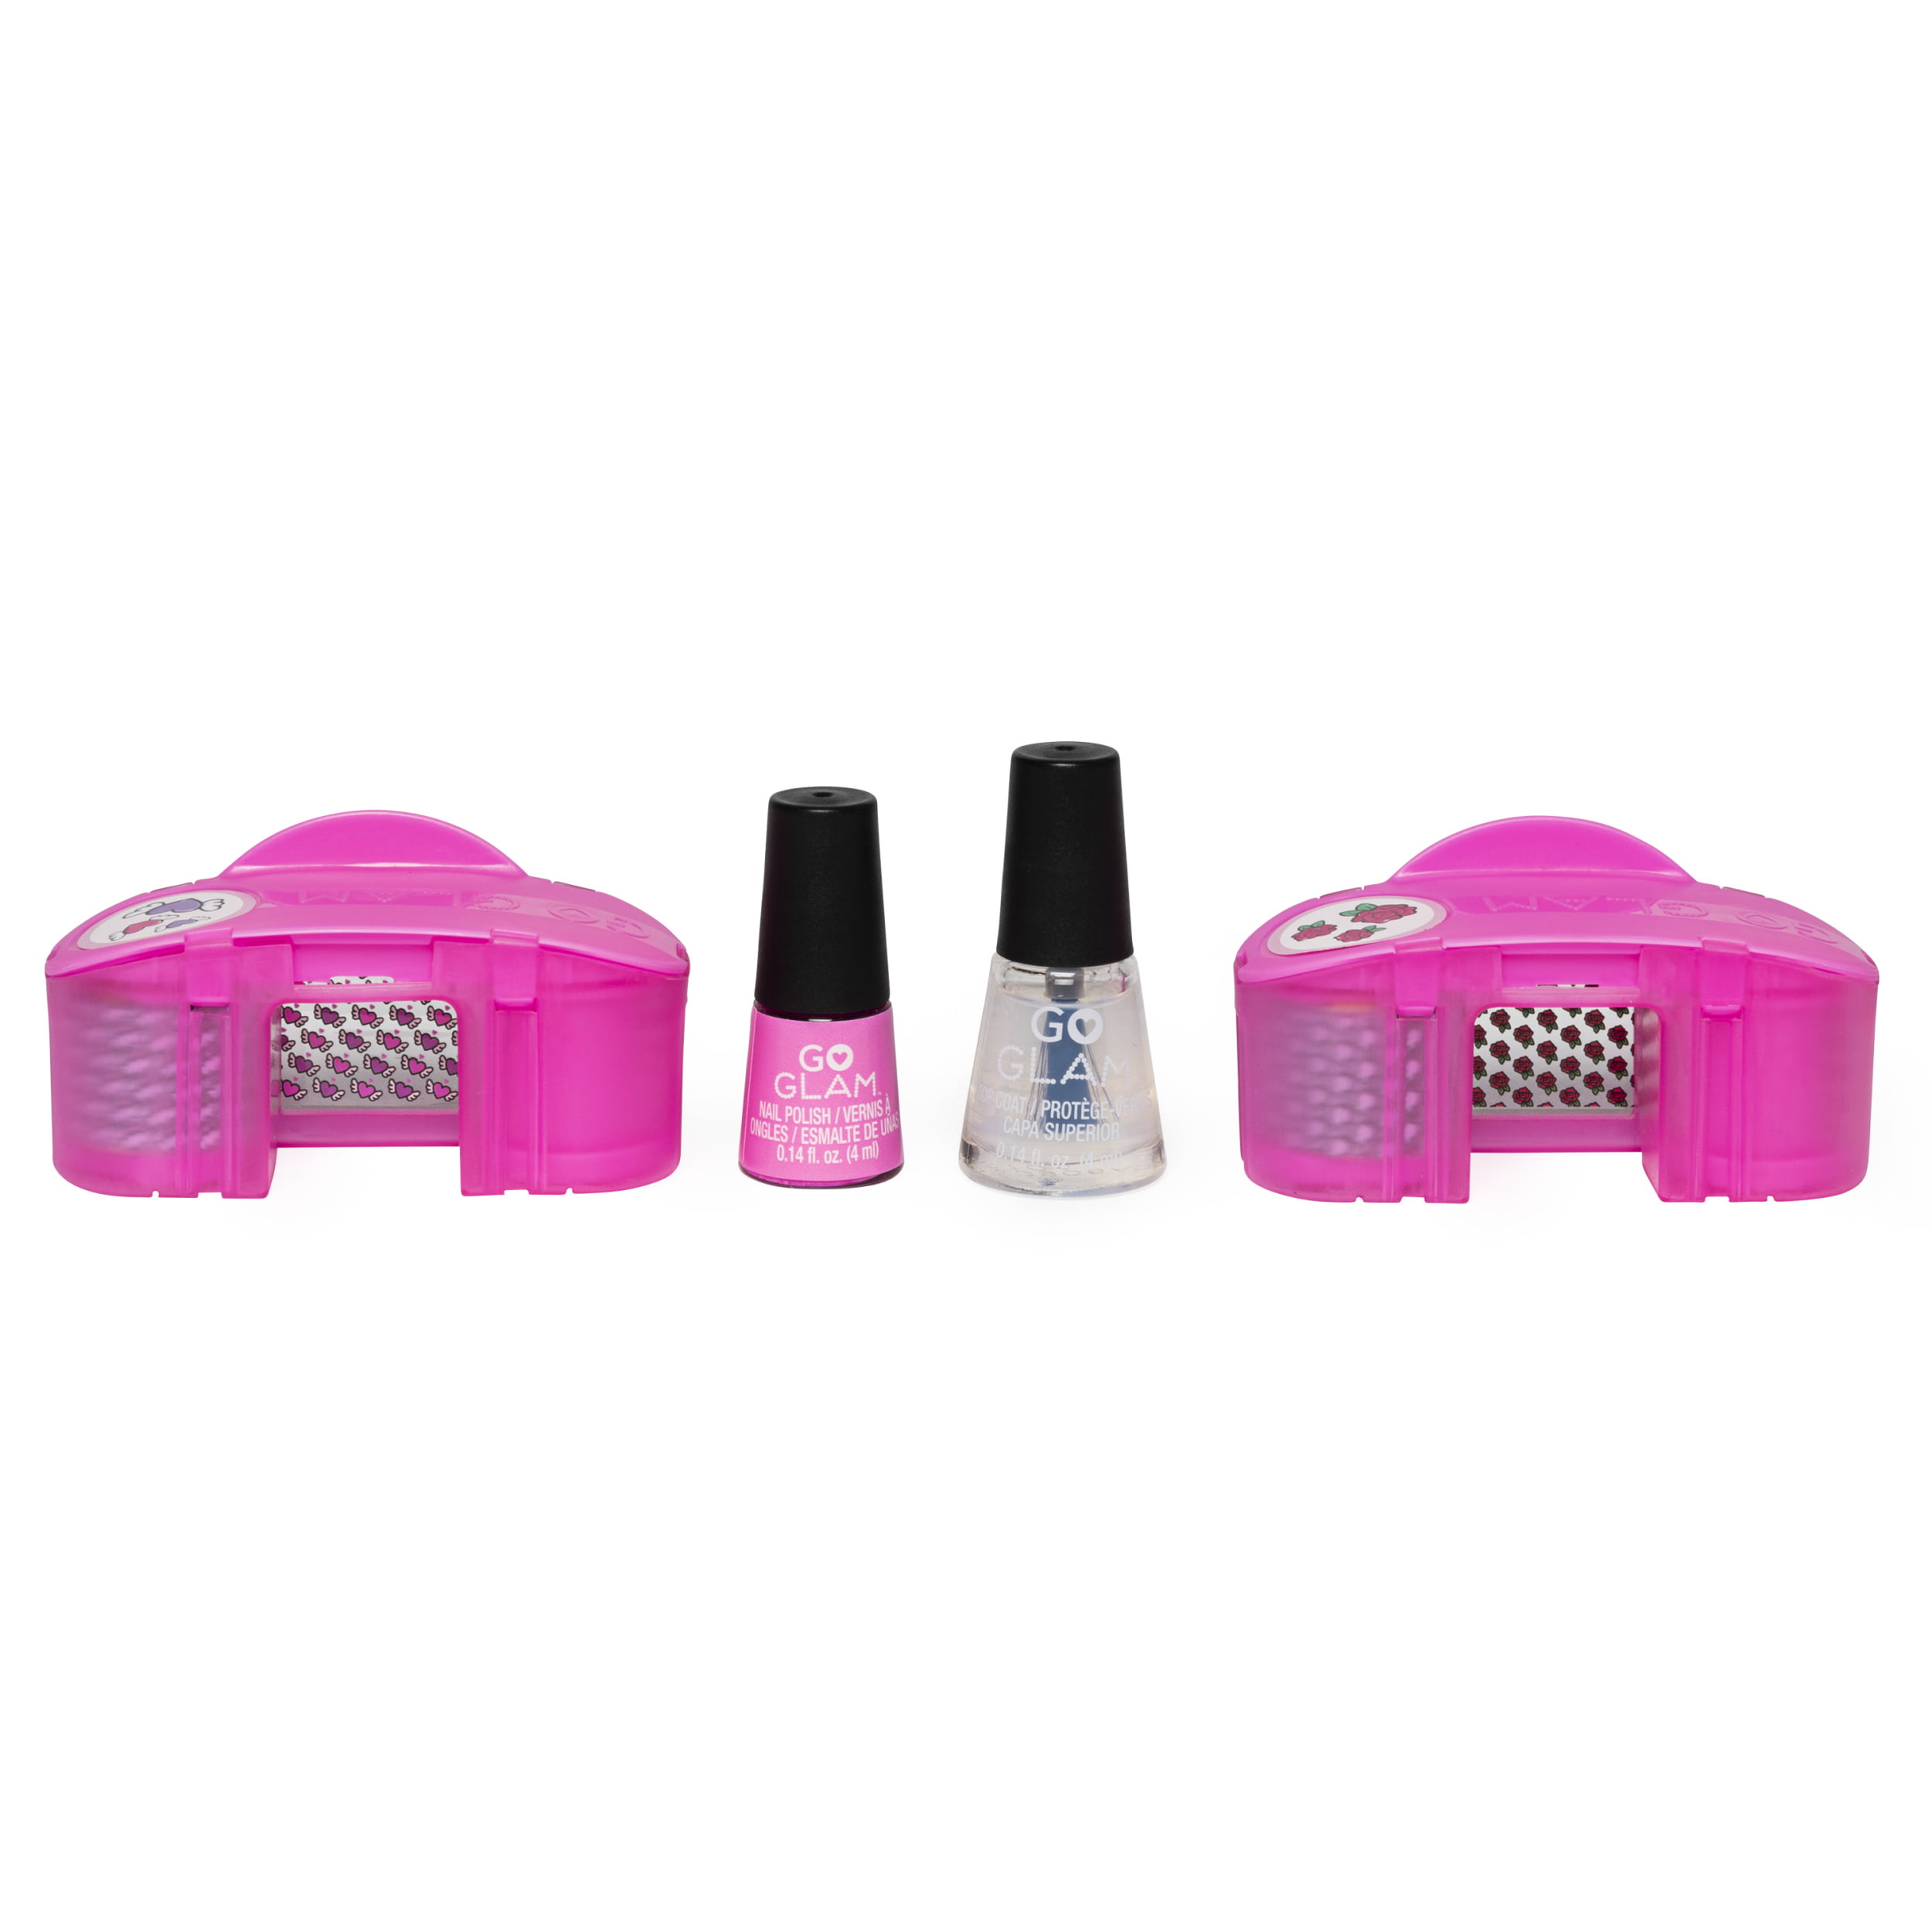 Go Glam Nail Stamper Recharge Large COOL MAKER Pas Cher 